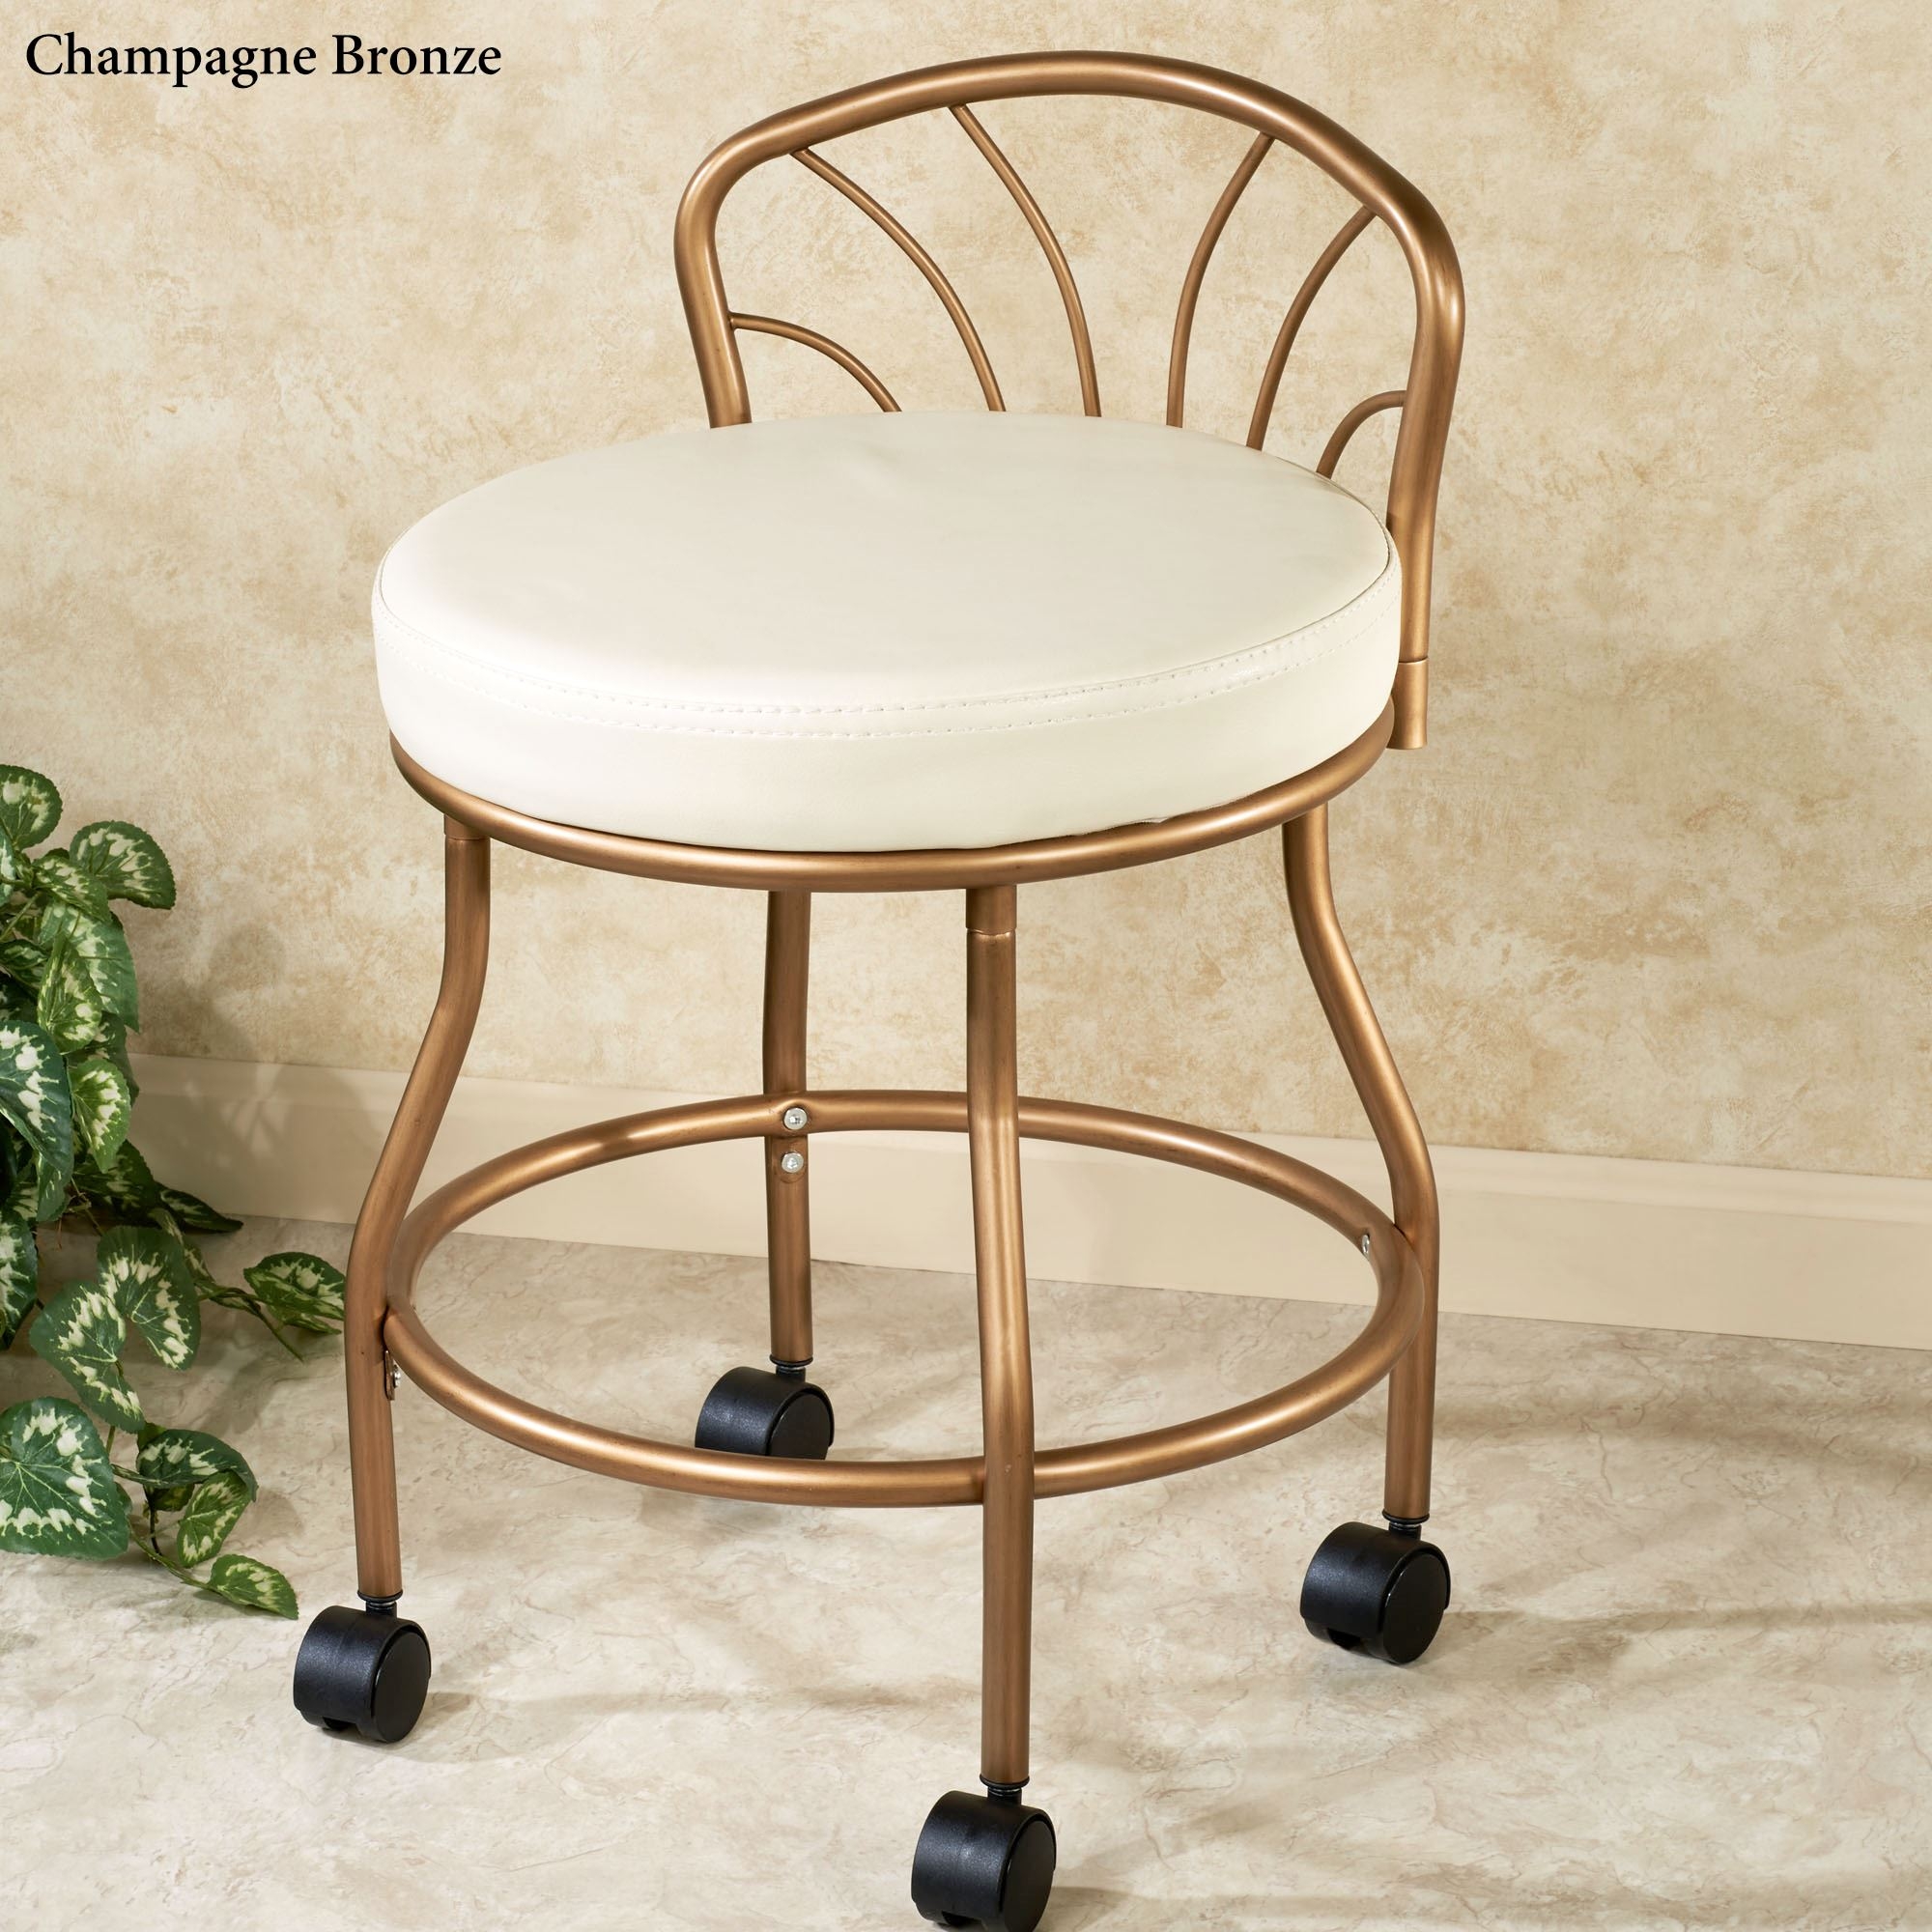 Vanity Chair With Wheels You Ll Love In, Bathroom Vanity Chairs With Casters